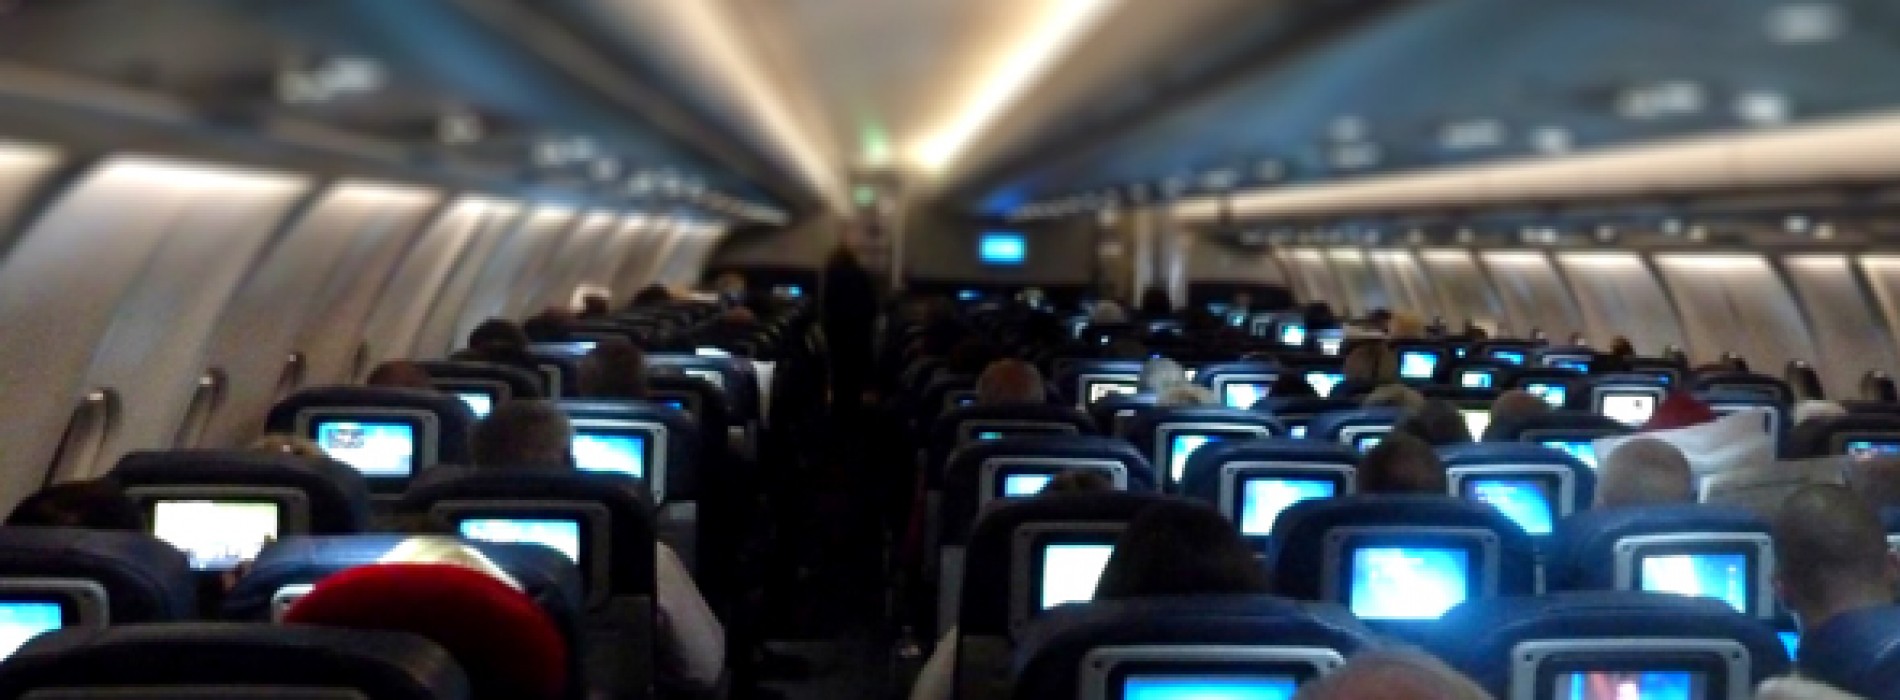 Top Five Suggestions for Airlines to Improve the Customer’s Experience